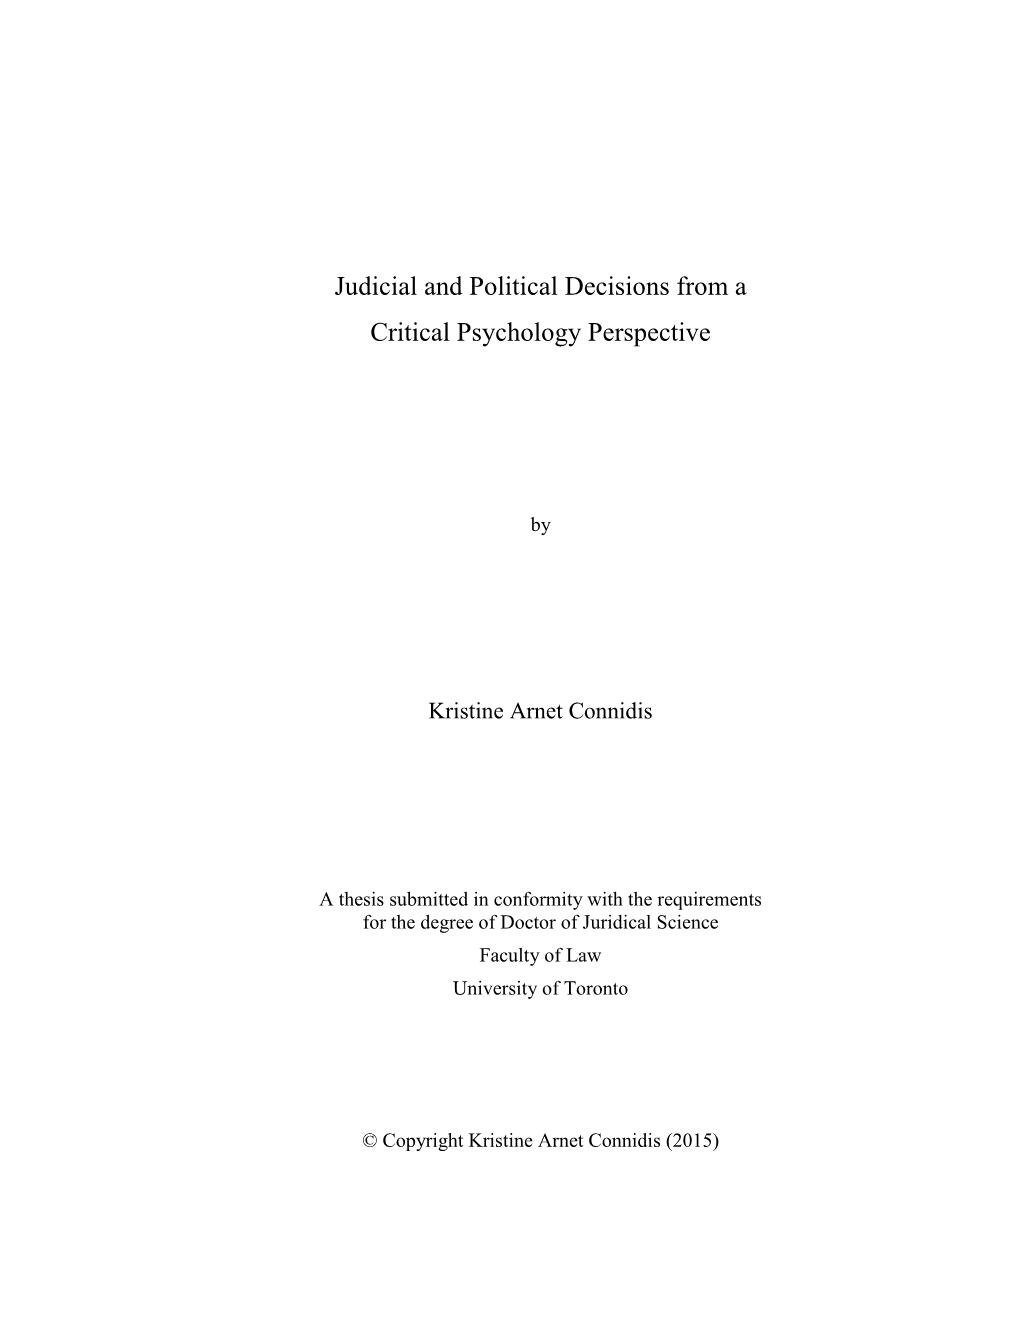 Judicial and Political Decisions from a Critical Psychology Perspective